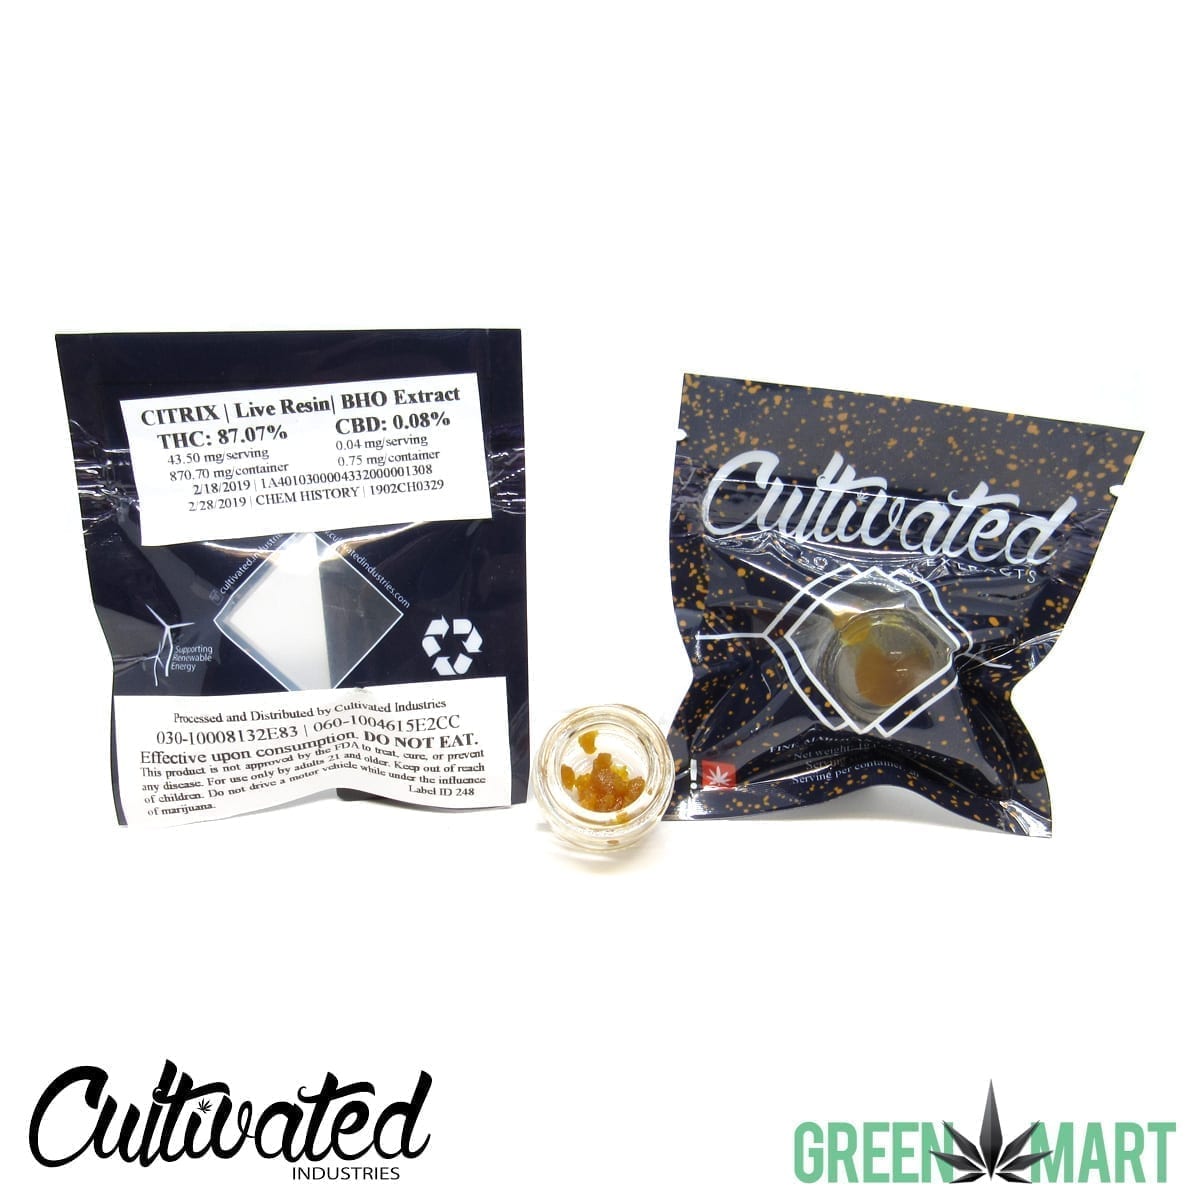 Cultivated Industries - Citrix Live Resin